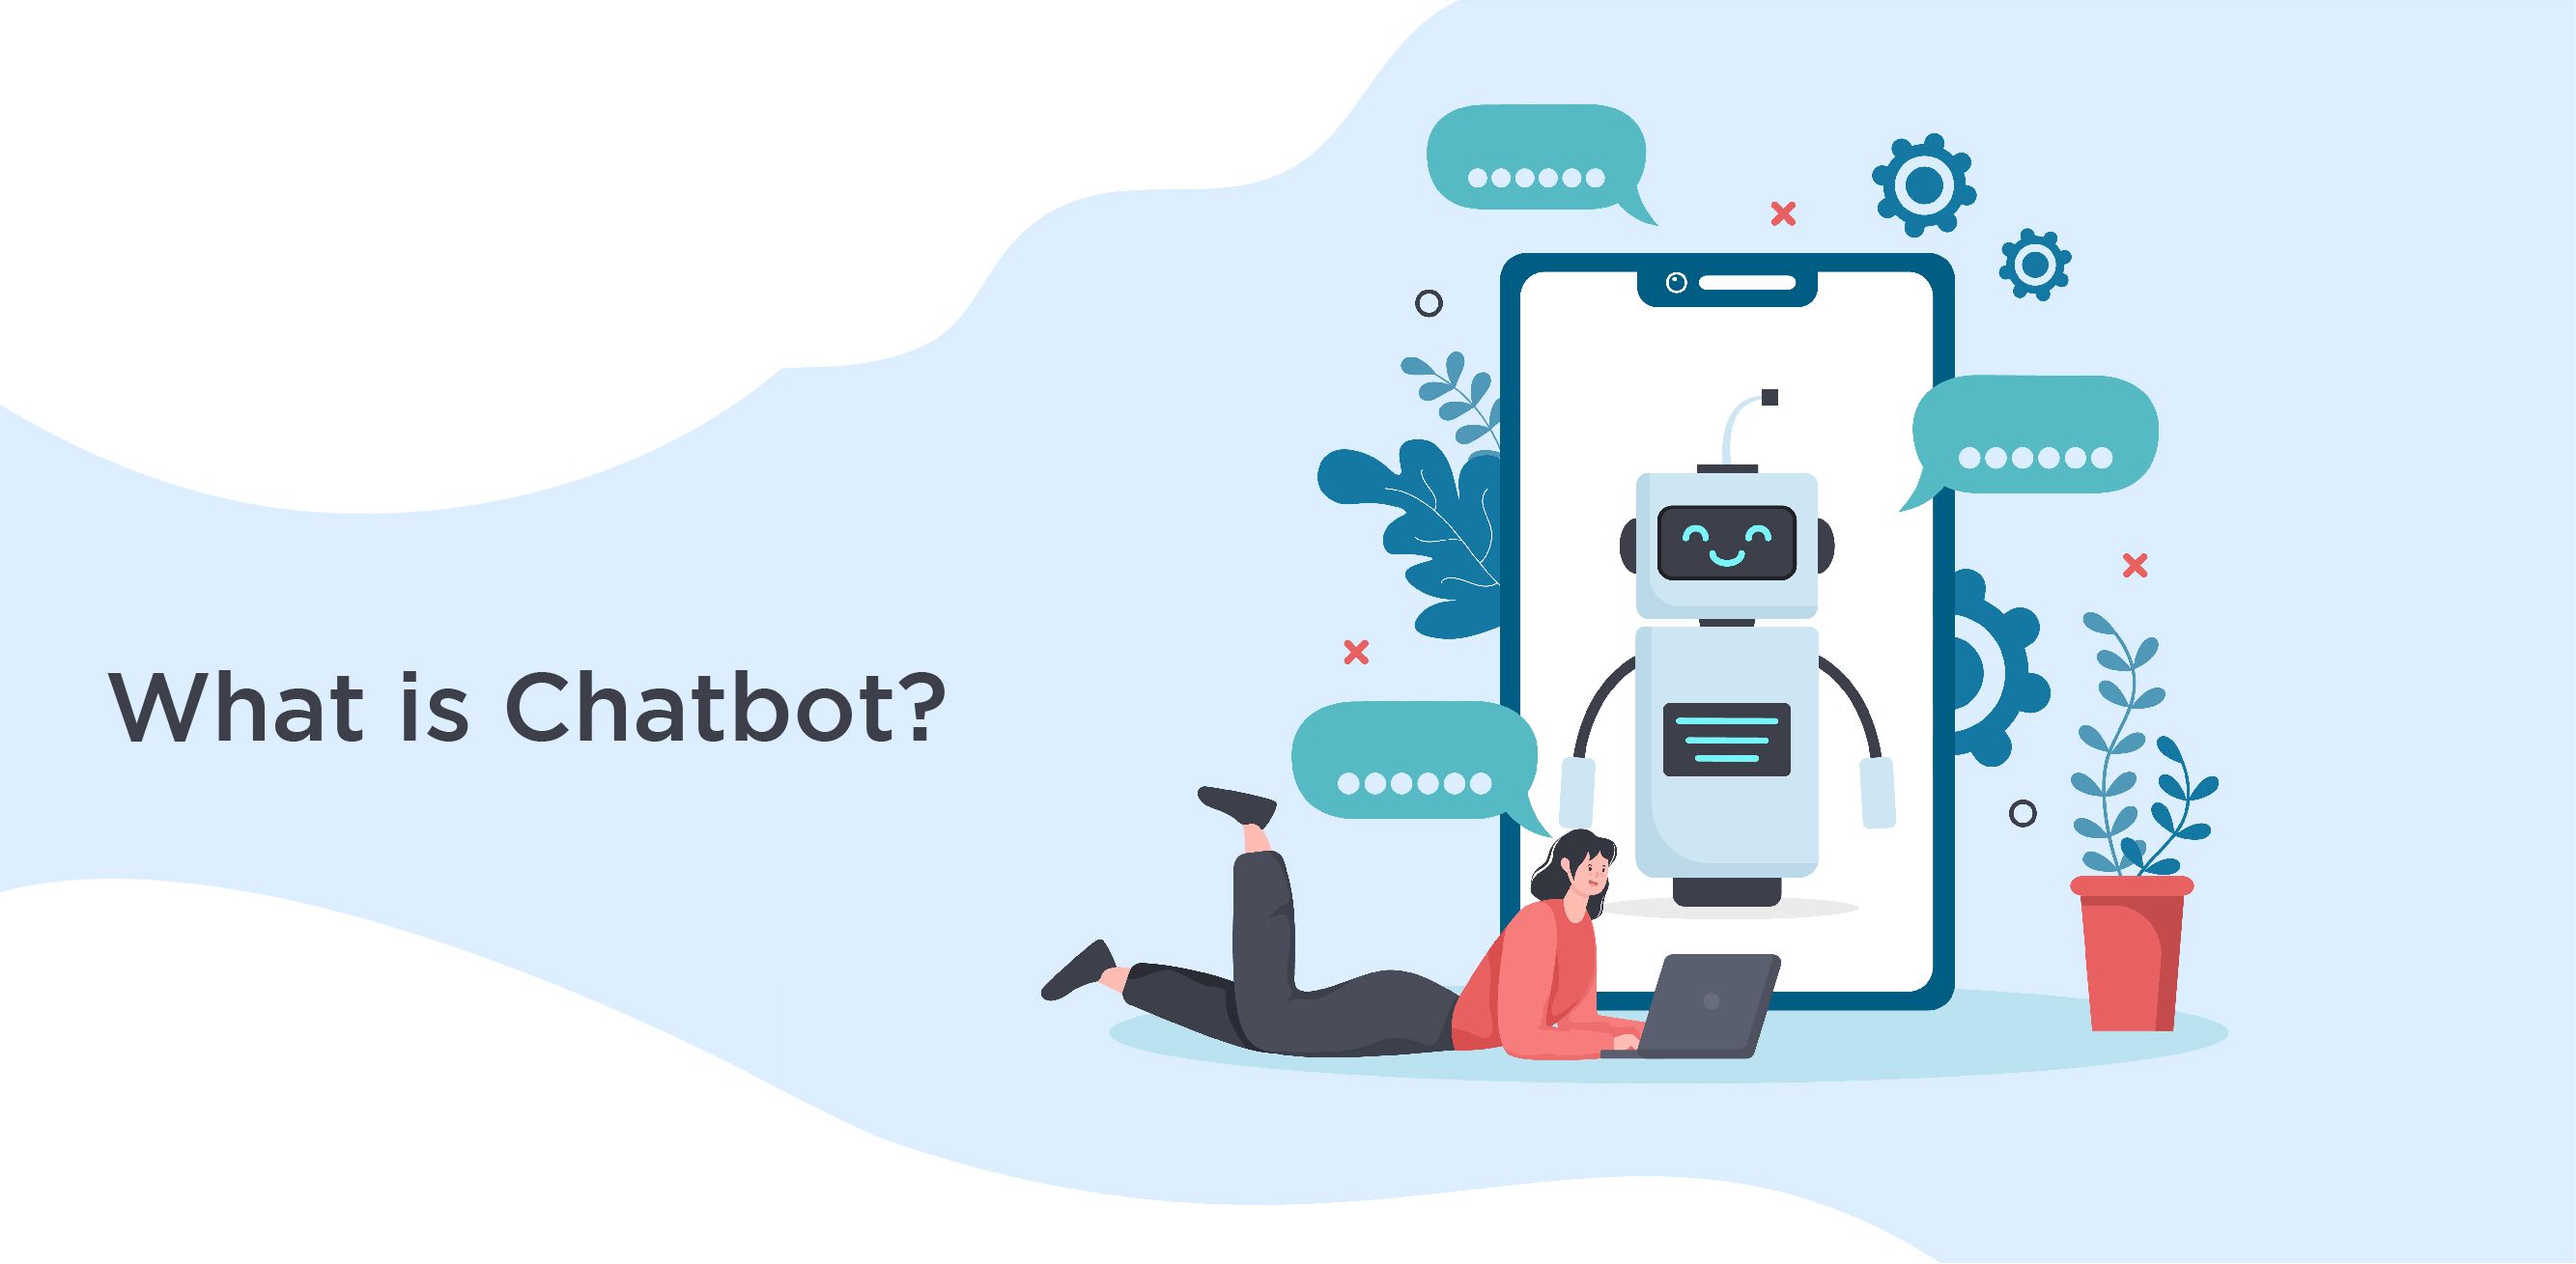 What is Chatbot?